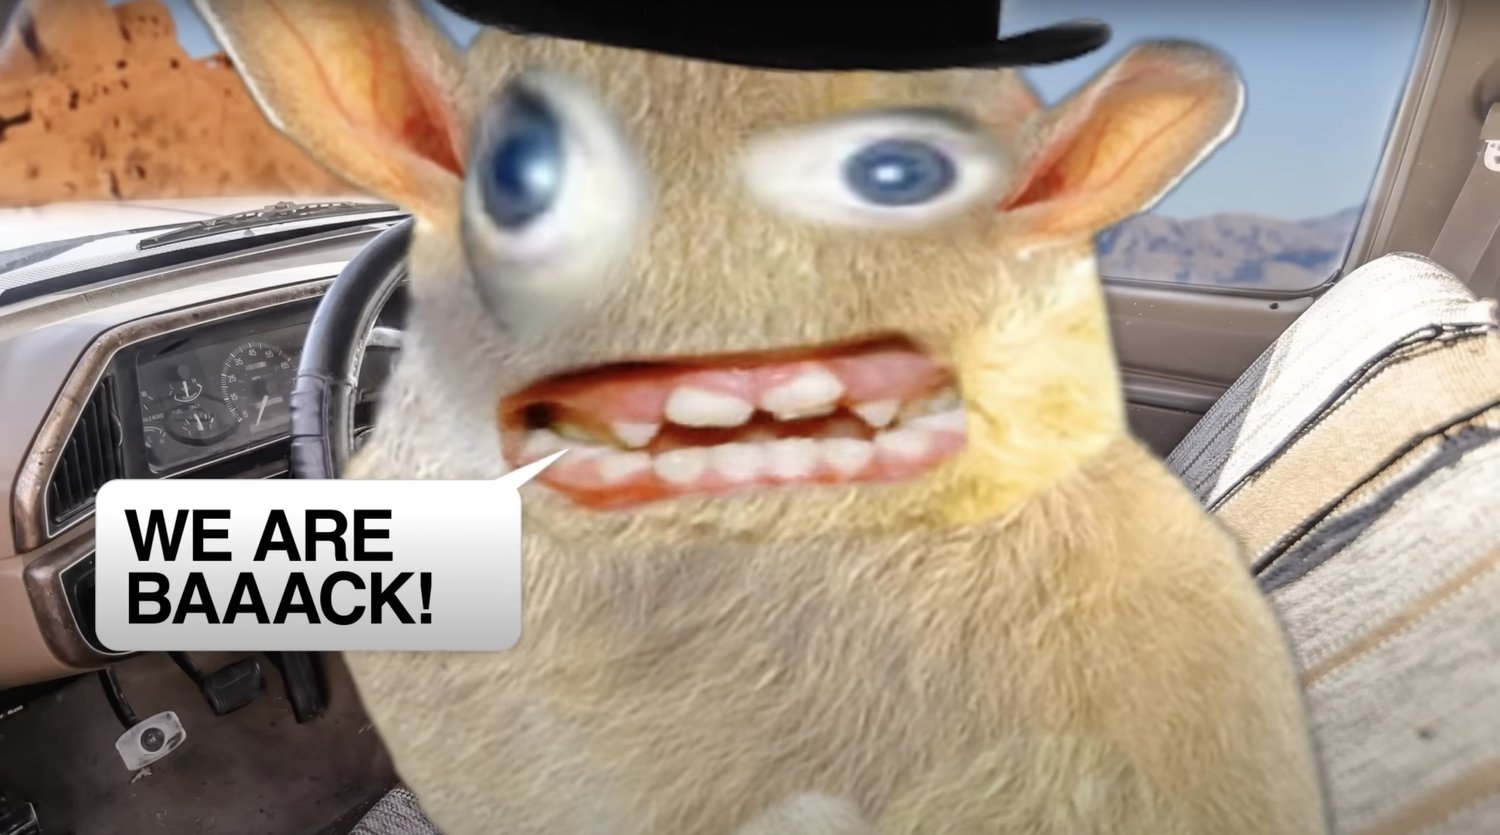 Quiznos Brings Back Its Deranged Spongmonkey Mascots for a New Commercial
      
    @media(min-width:0px){#div-gpt-ad-geektyrant_com-box-3-0-asloaded{max-width:728px;width:728px!important;max-height:90px;height:90px!important;}}